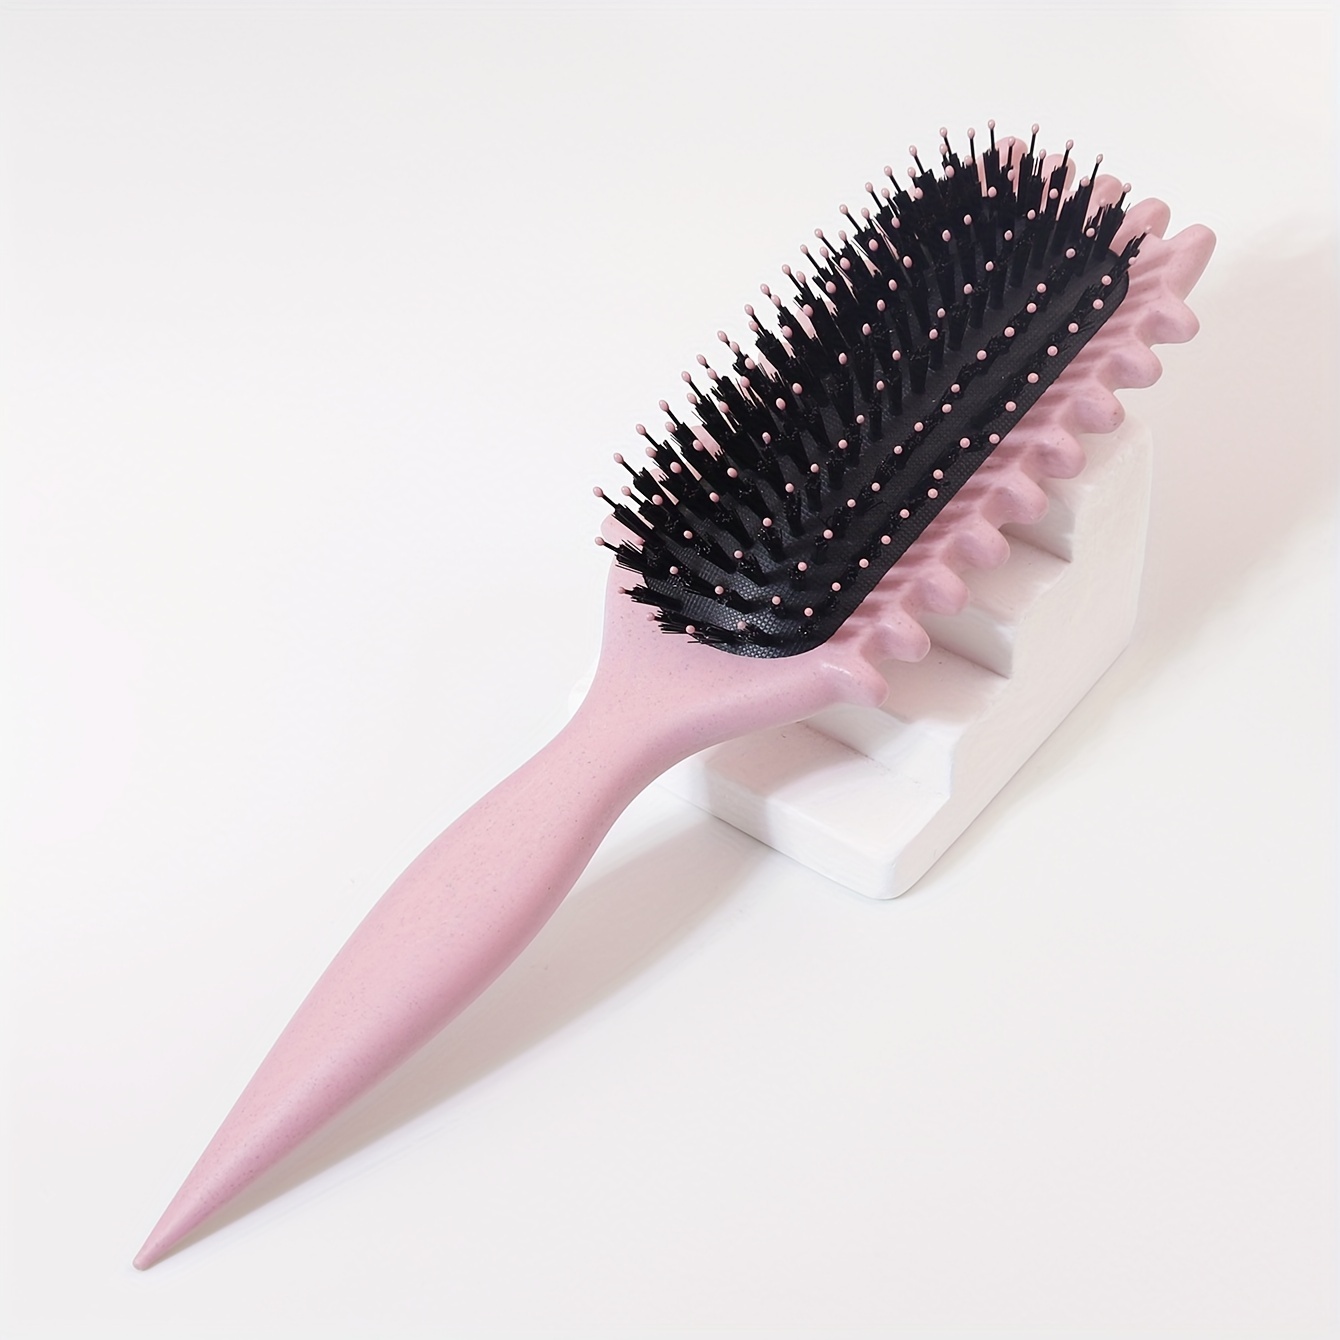 

1pc Premium Air Cushion Hair Brush With Bristles - Detangling & Styling Comb For All Hair Types, Durable Abs Handle